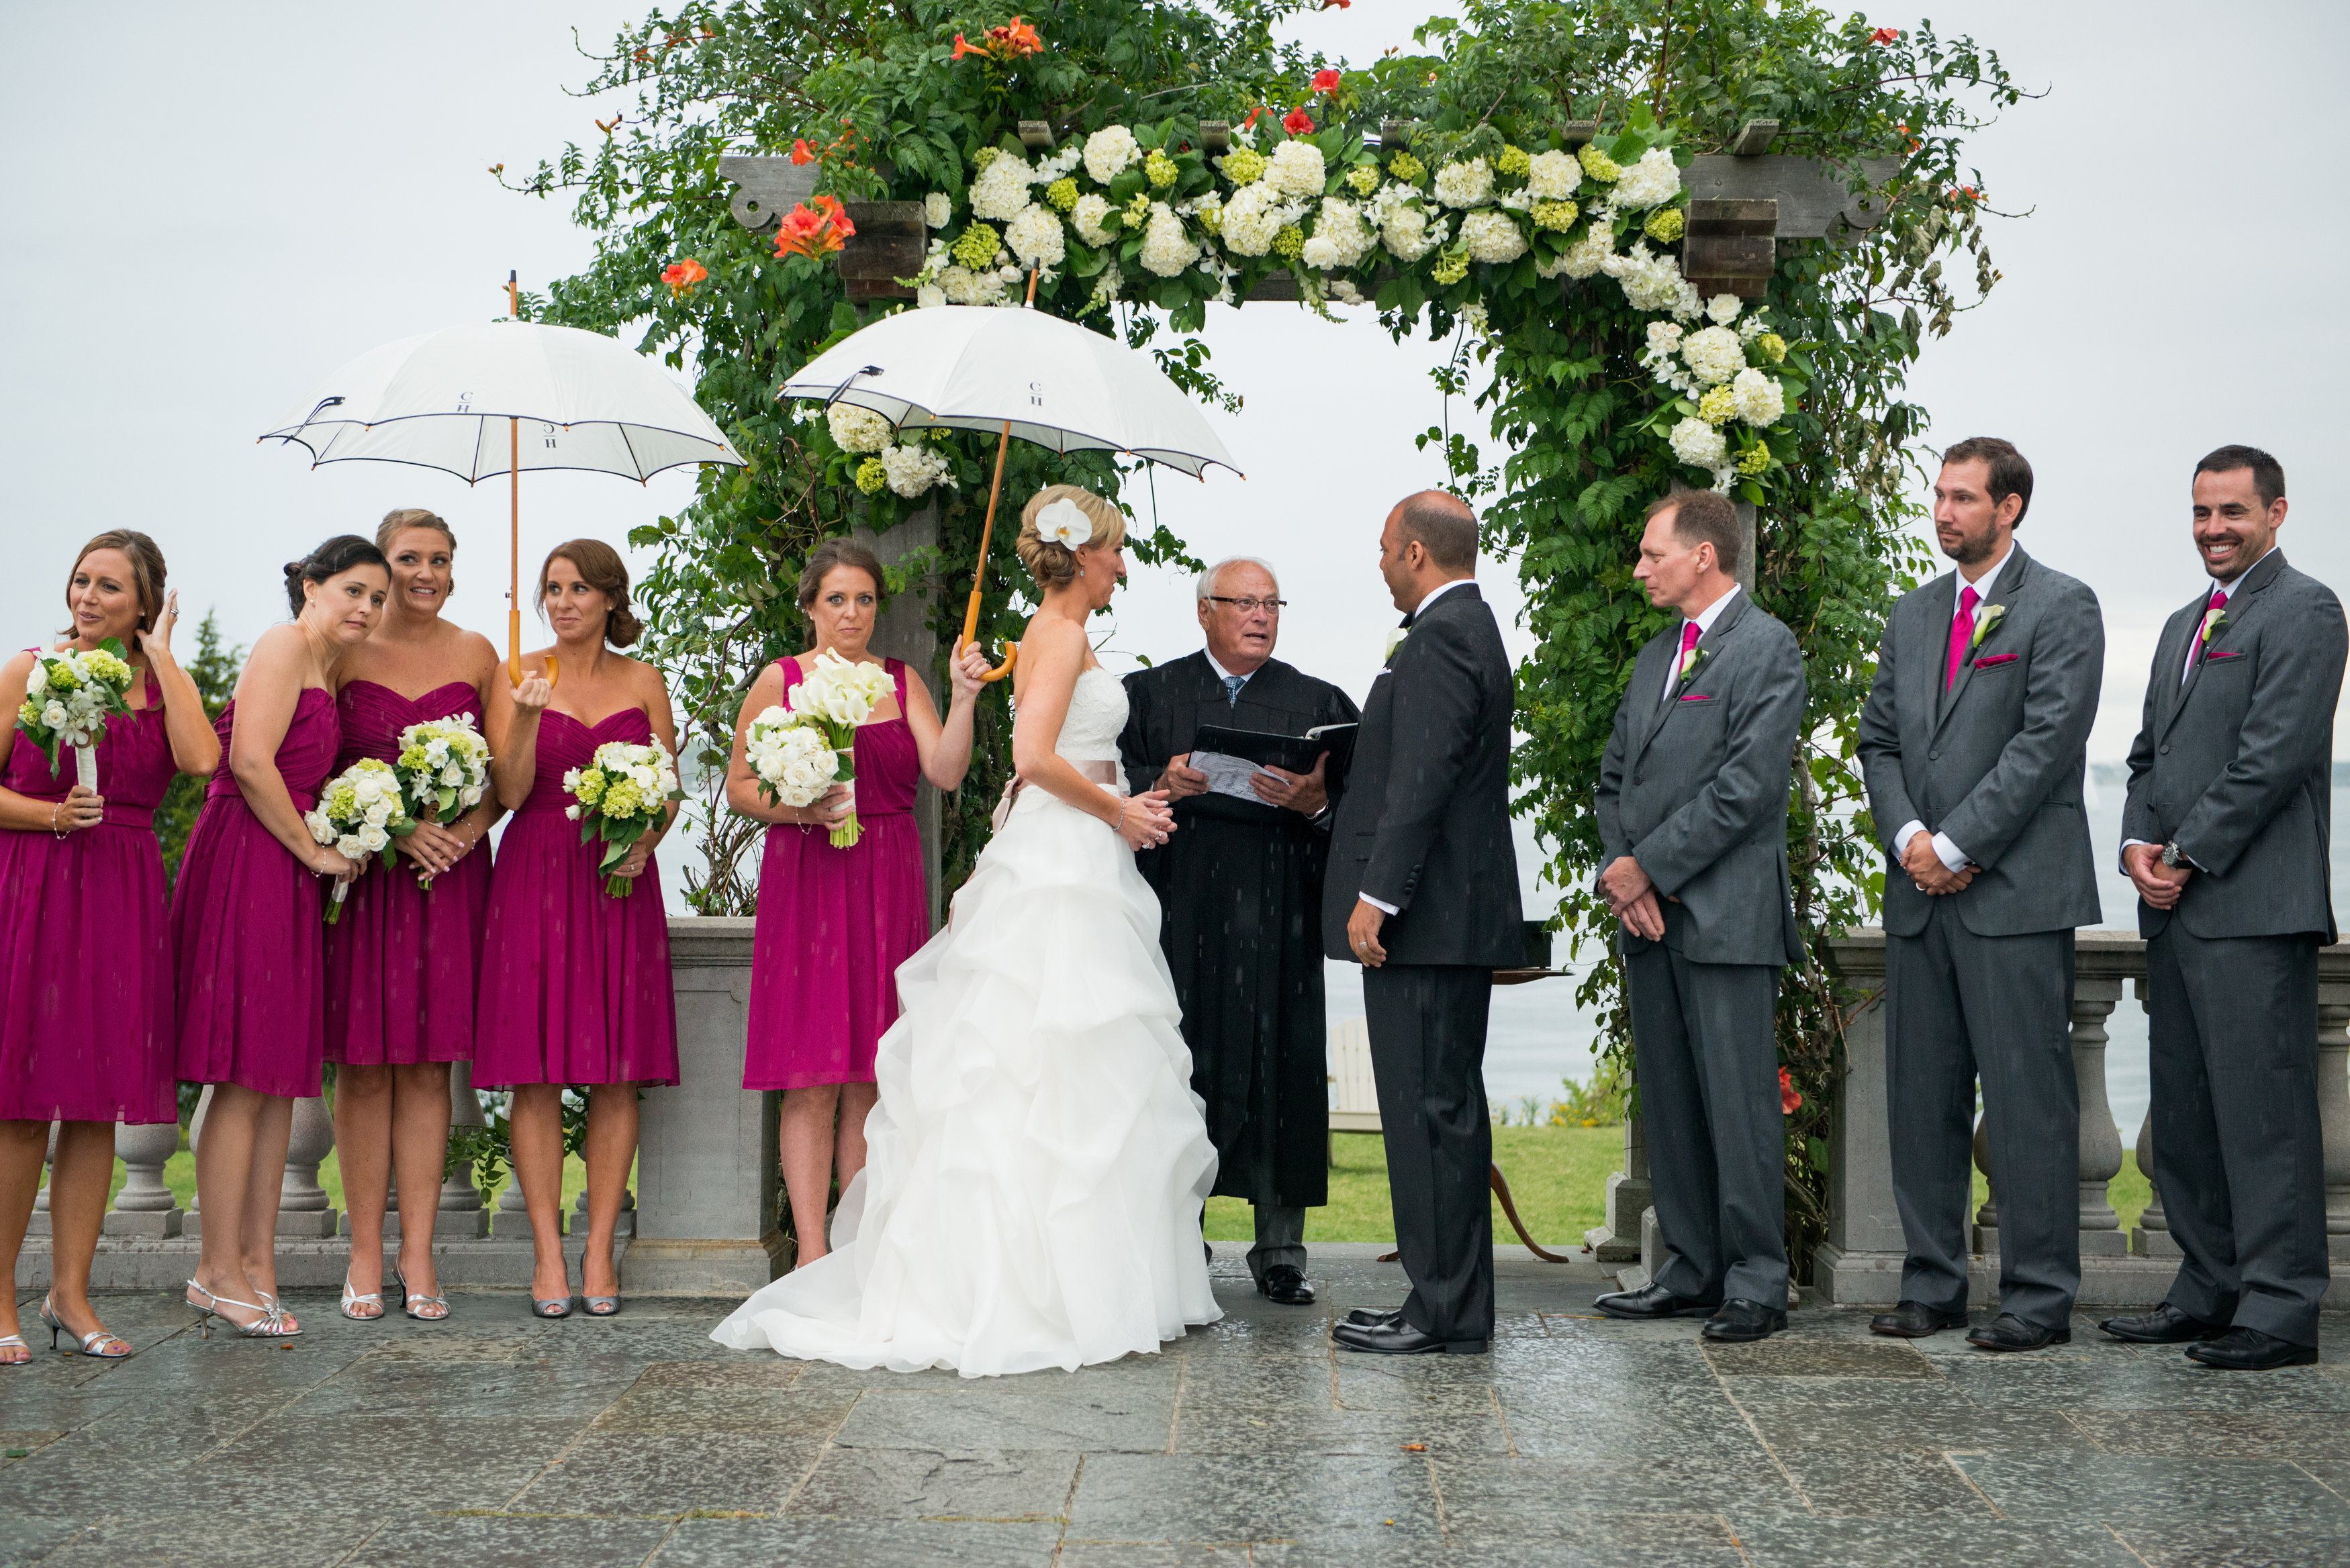 View More: http://snapweddings.pass.us/guthrie-carmickle-wedding